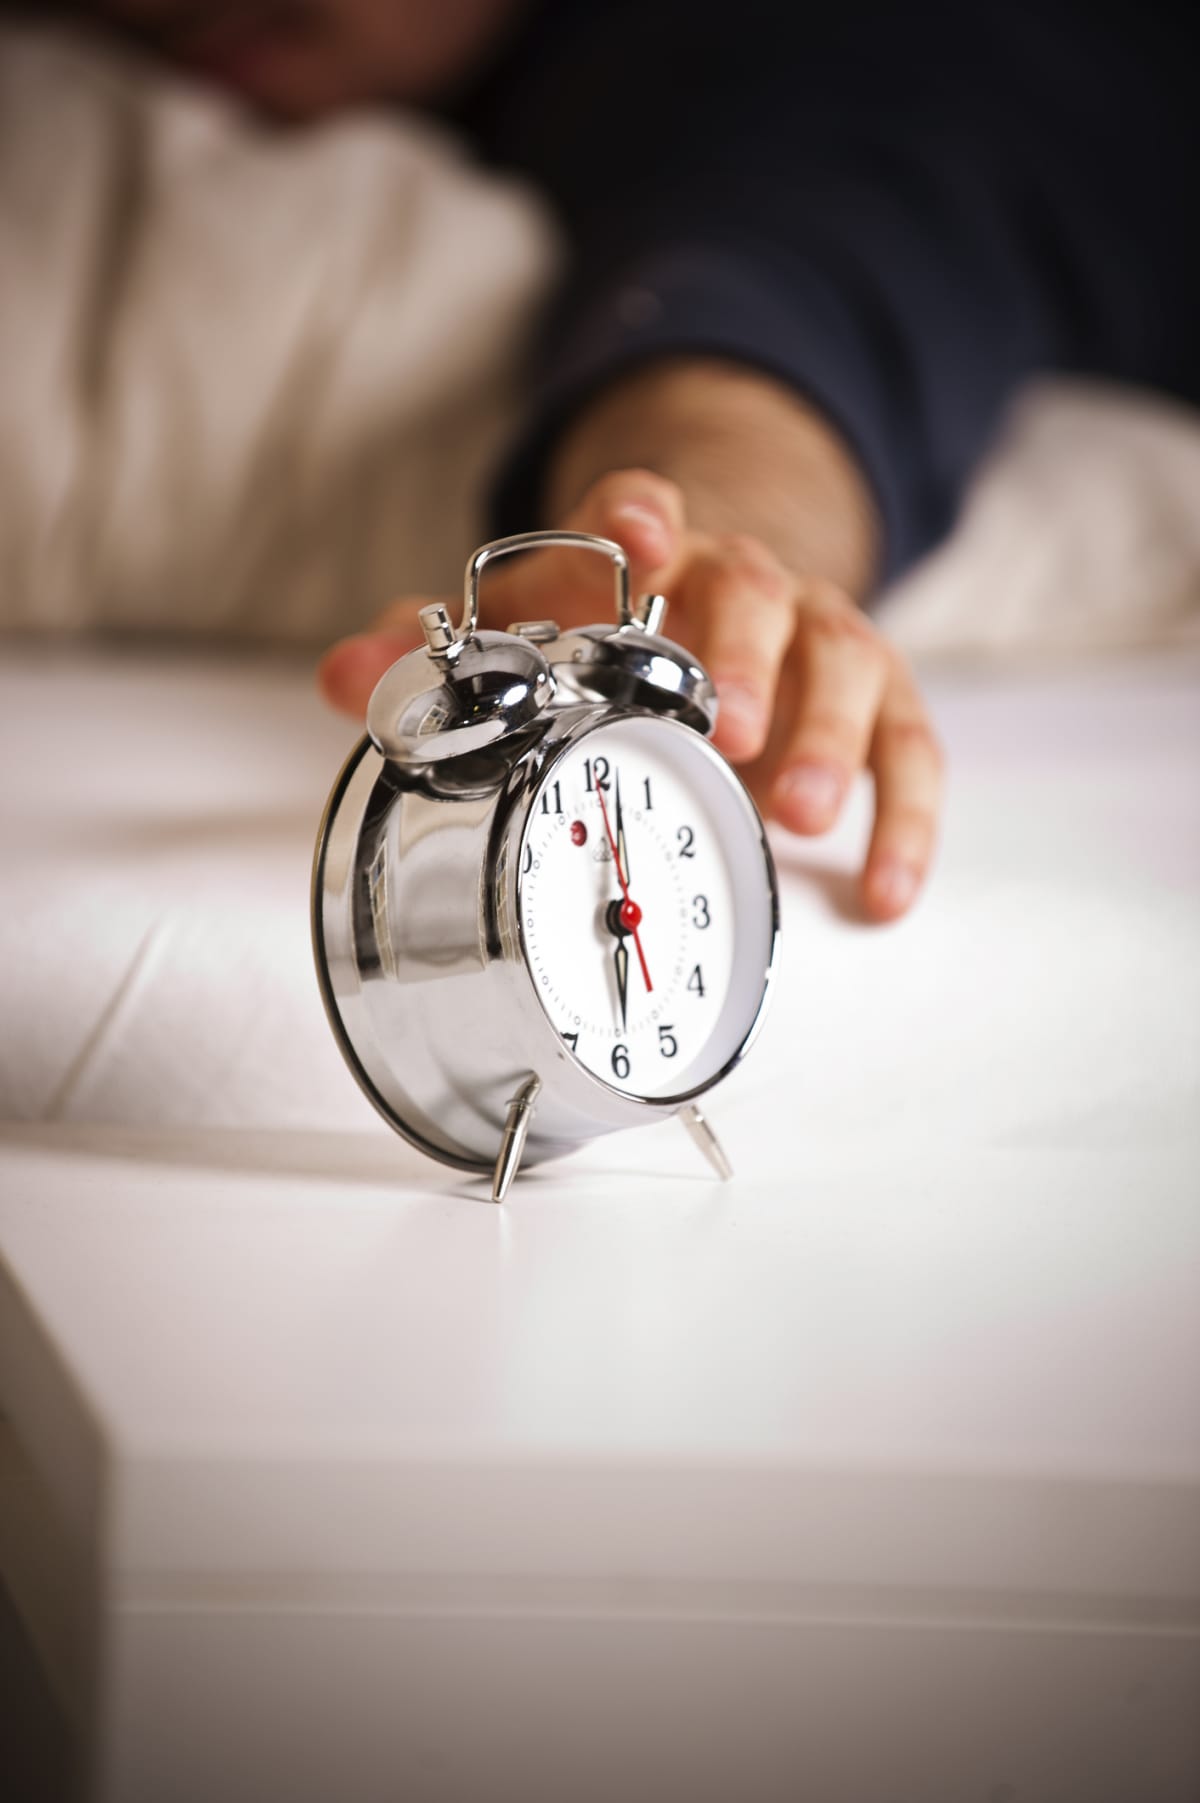 hand reaching out of bed to turn off alarm clock